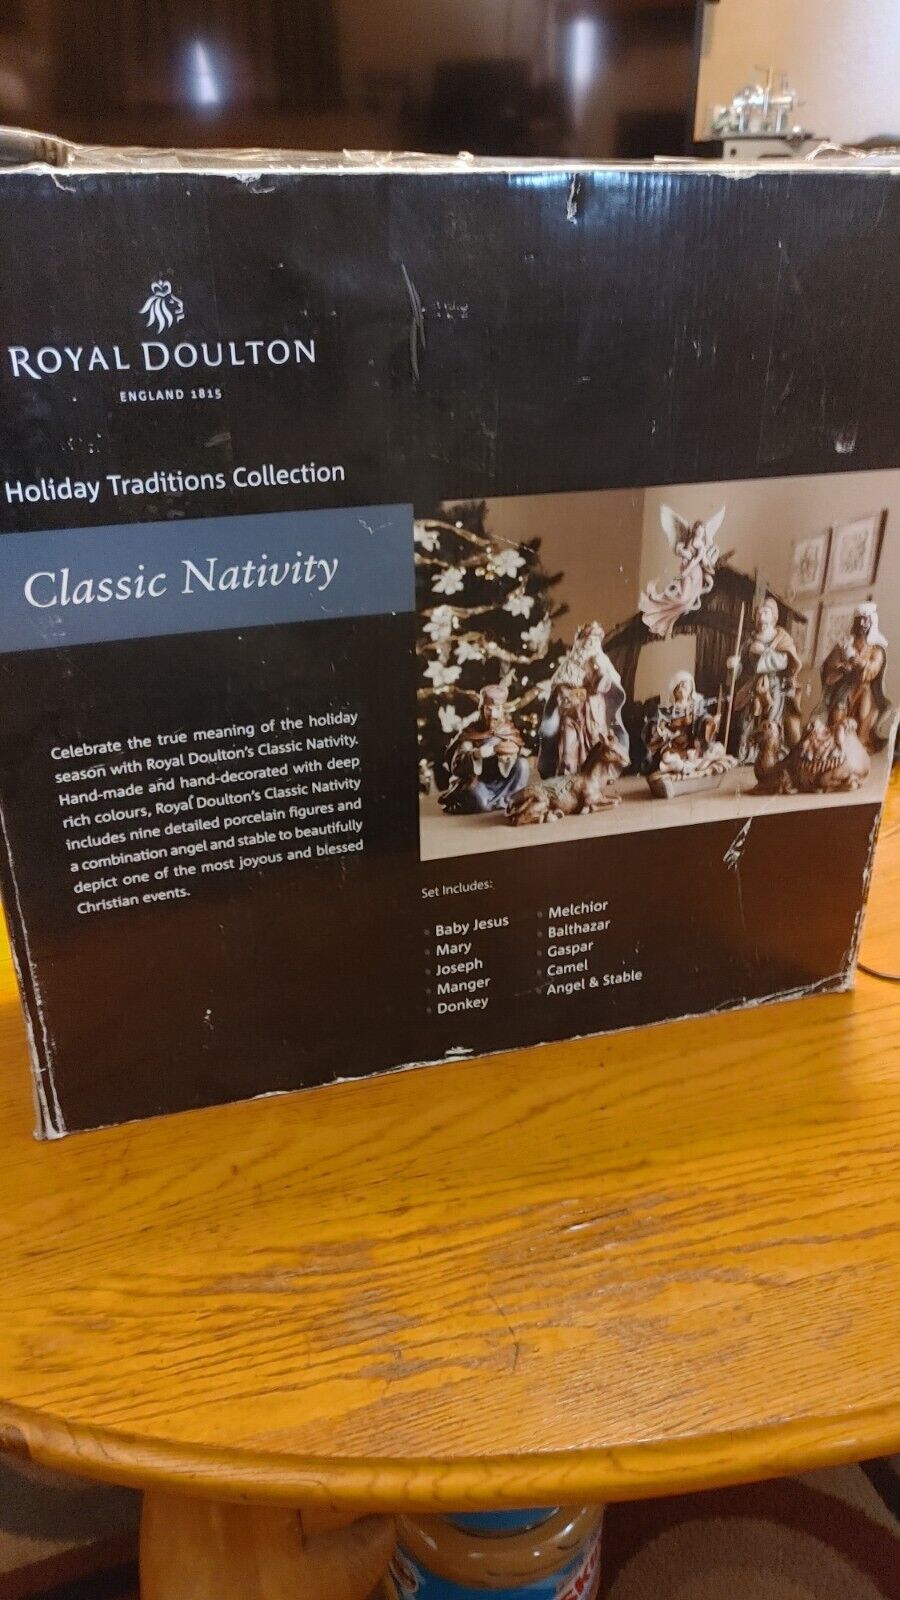 Royal Doulton Holiday Traditions Collection Classic Nativity 11 Piece Set RARE